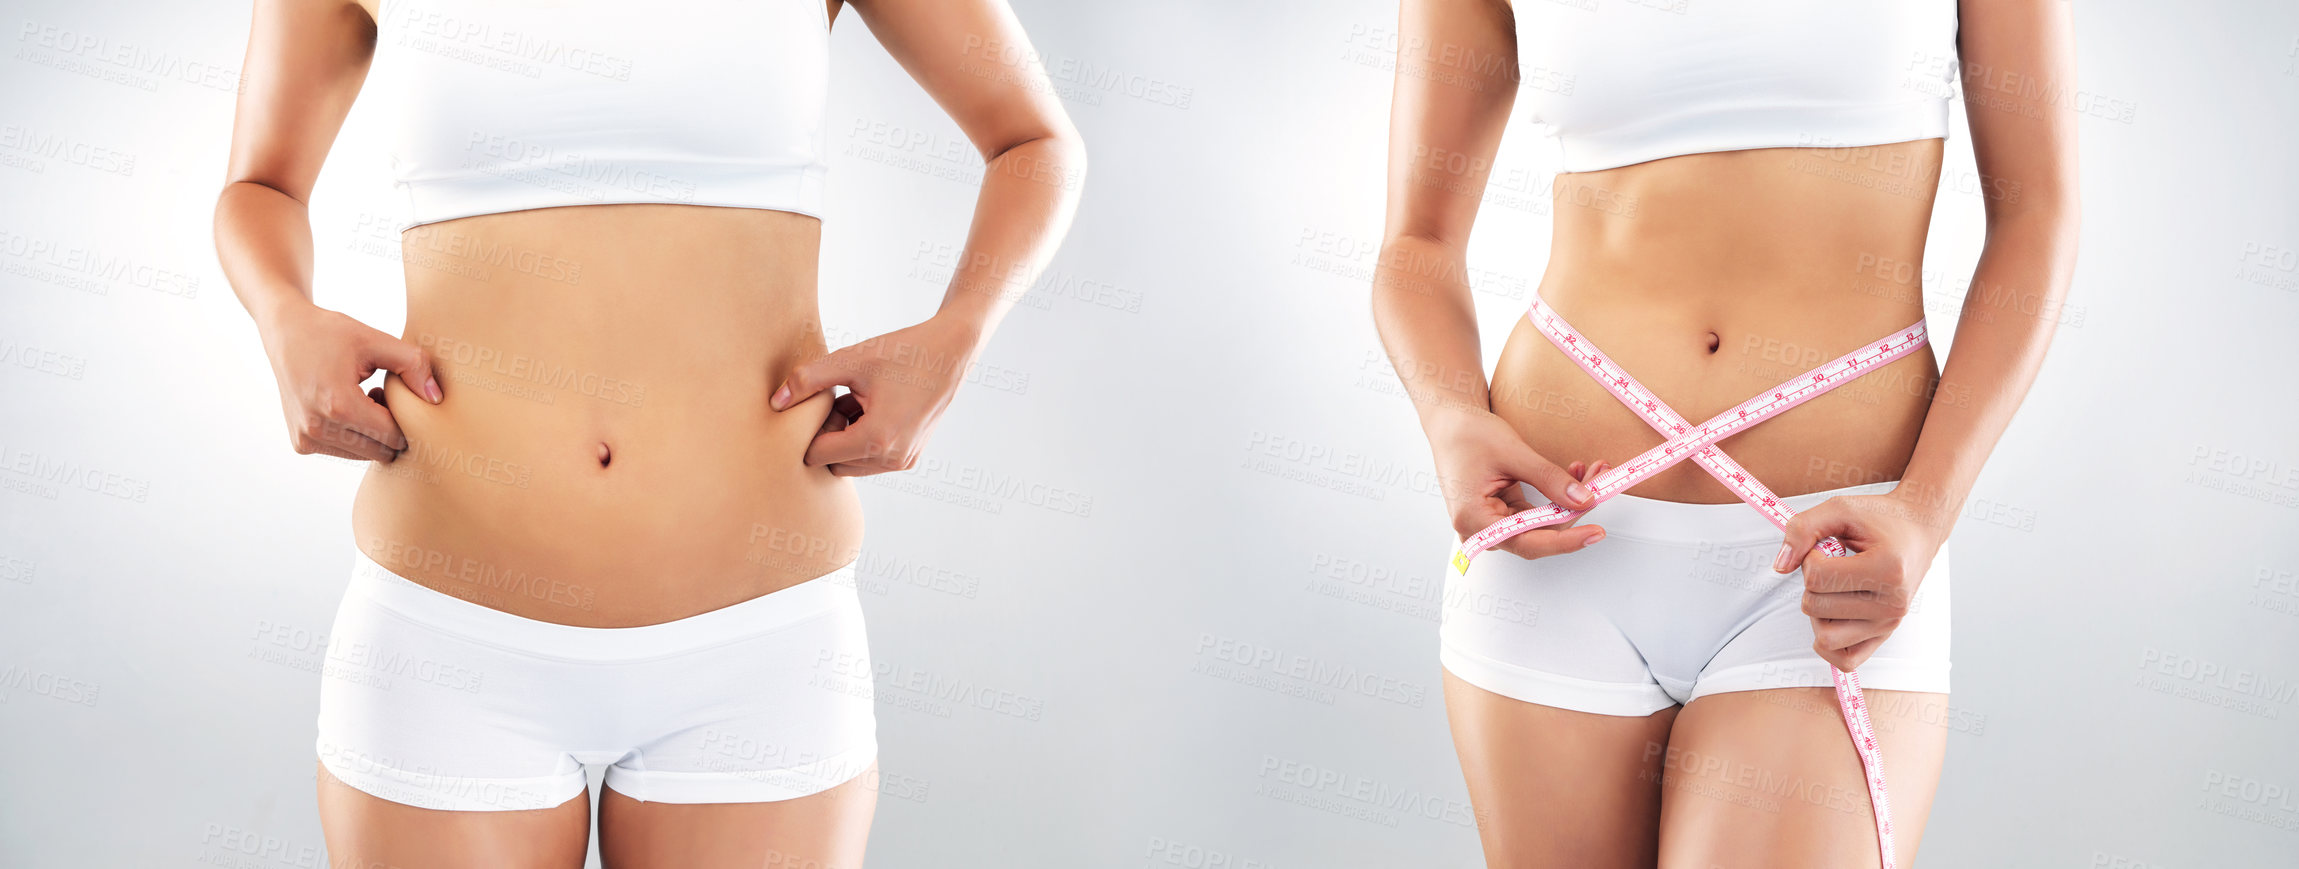 Buy stock photo Studio shot of an unrecognizable woman showing two sides of weight loss and weight gain against a grey background